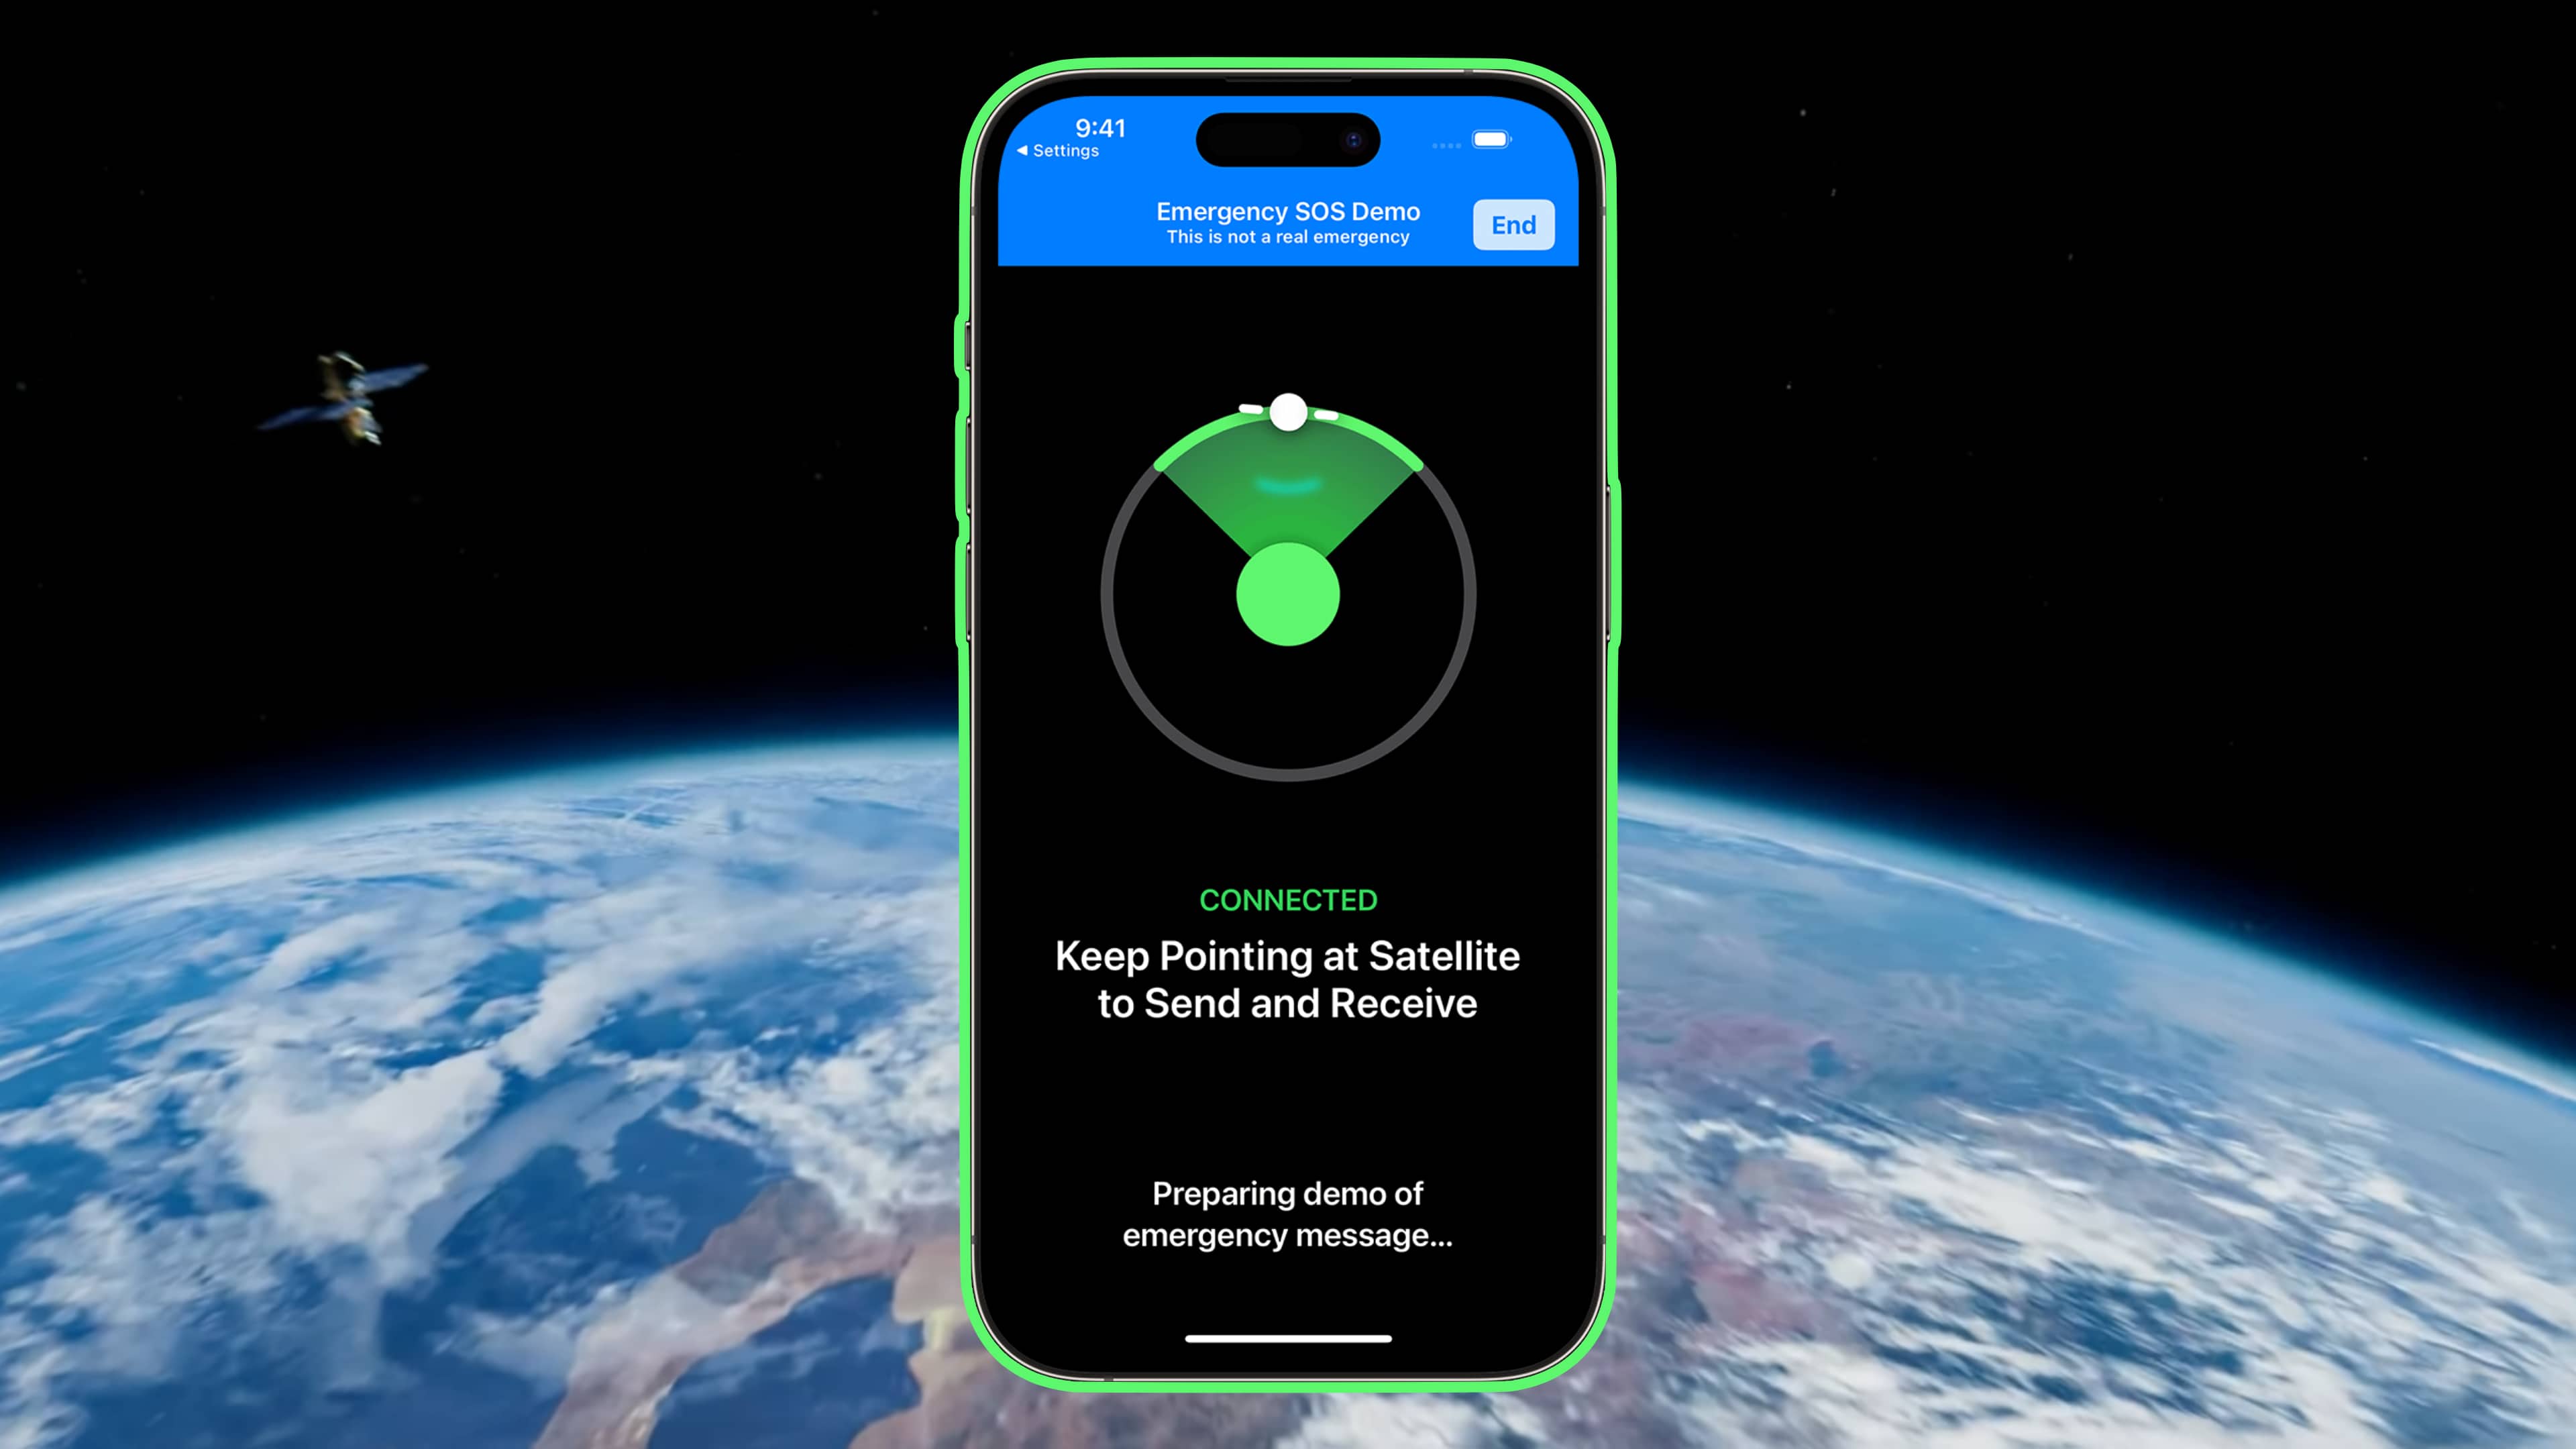 Composition showing an iPhone 14 Pro with the Emergency SOS via satellite demo, set against an image of Earth and an orbiting satellite in the background